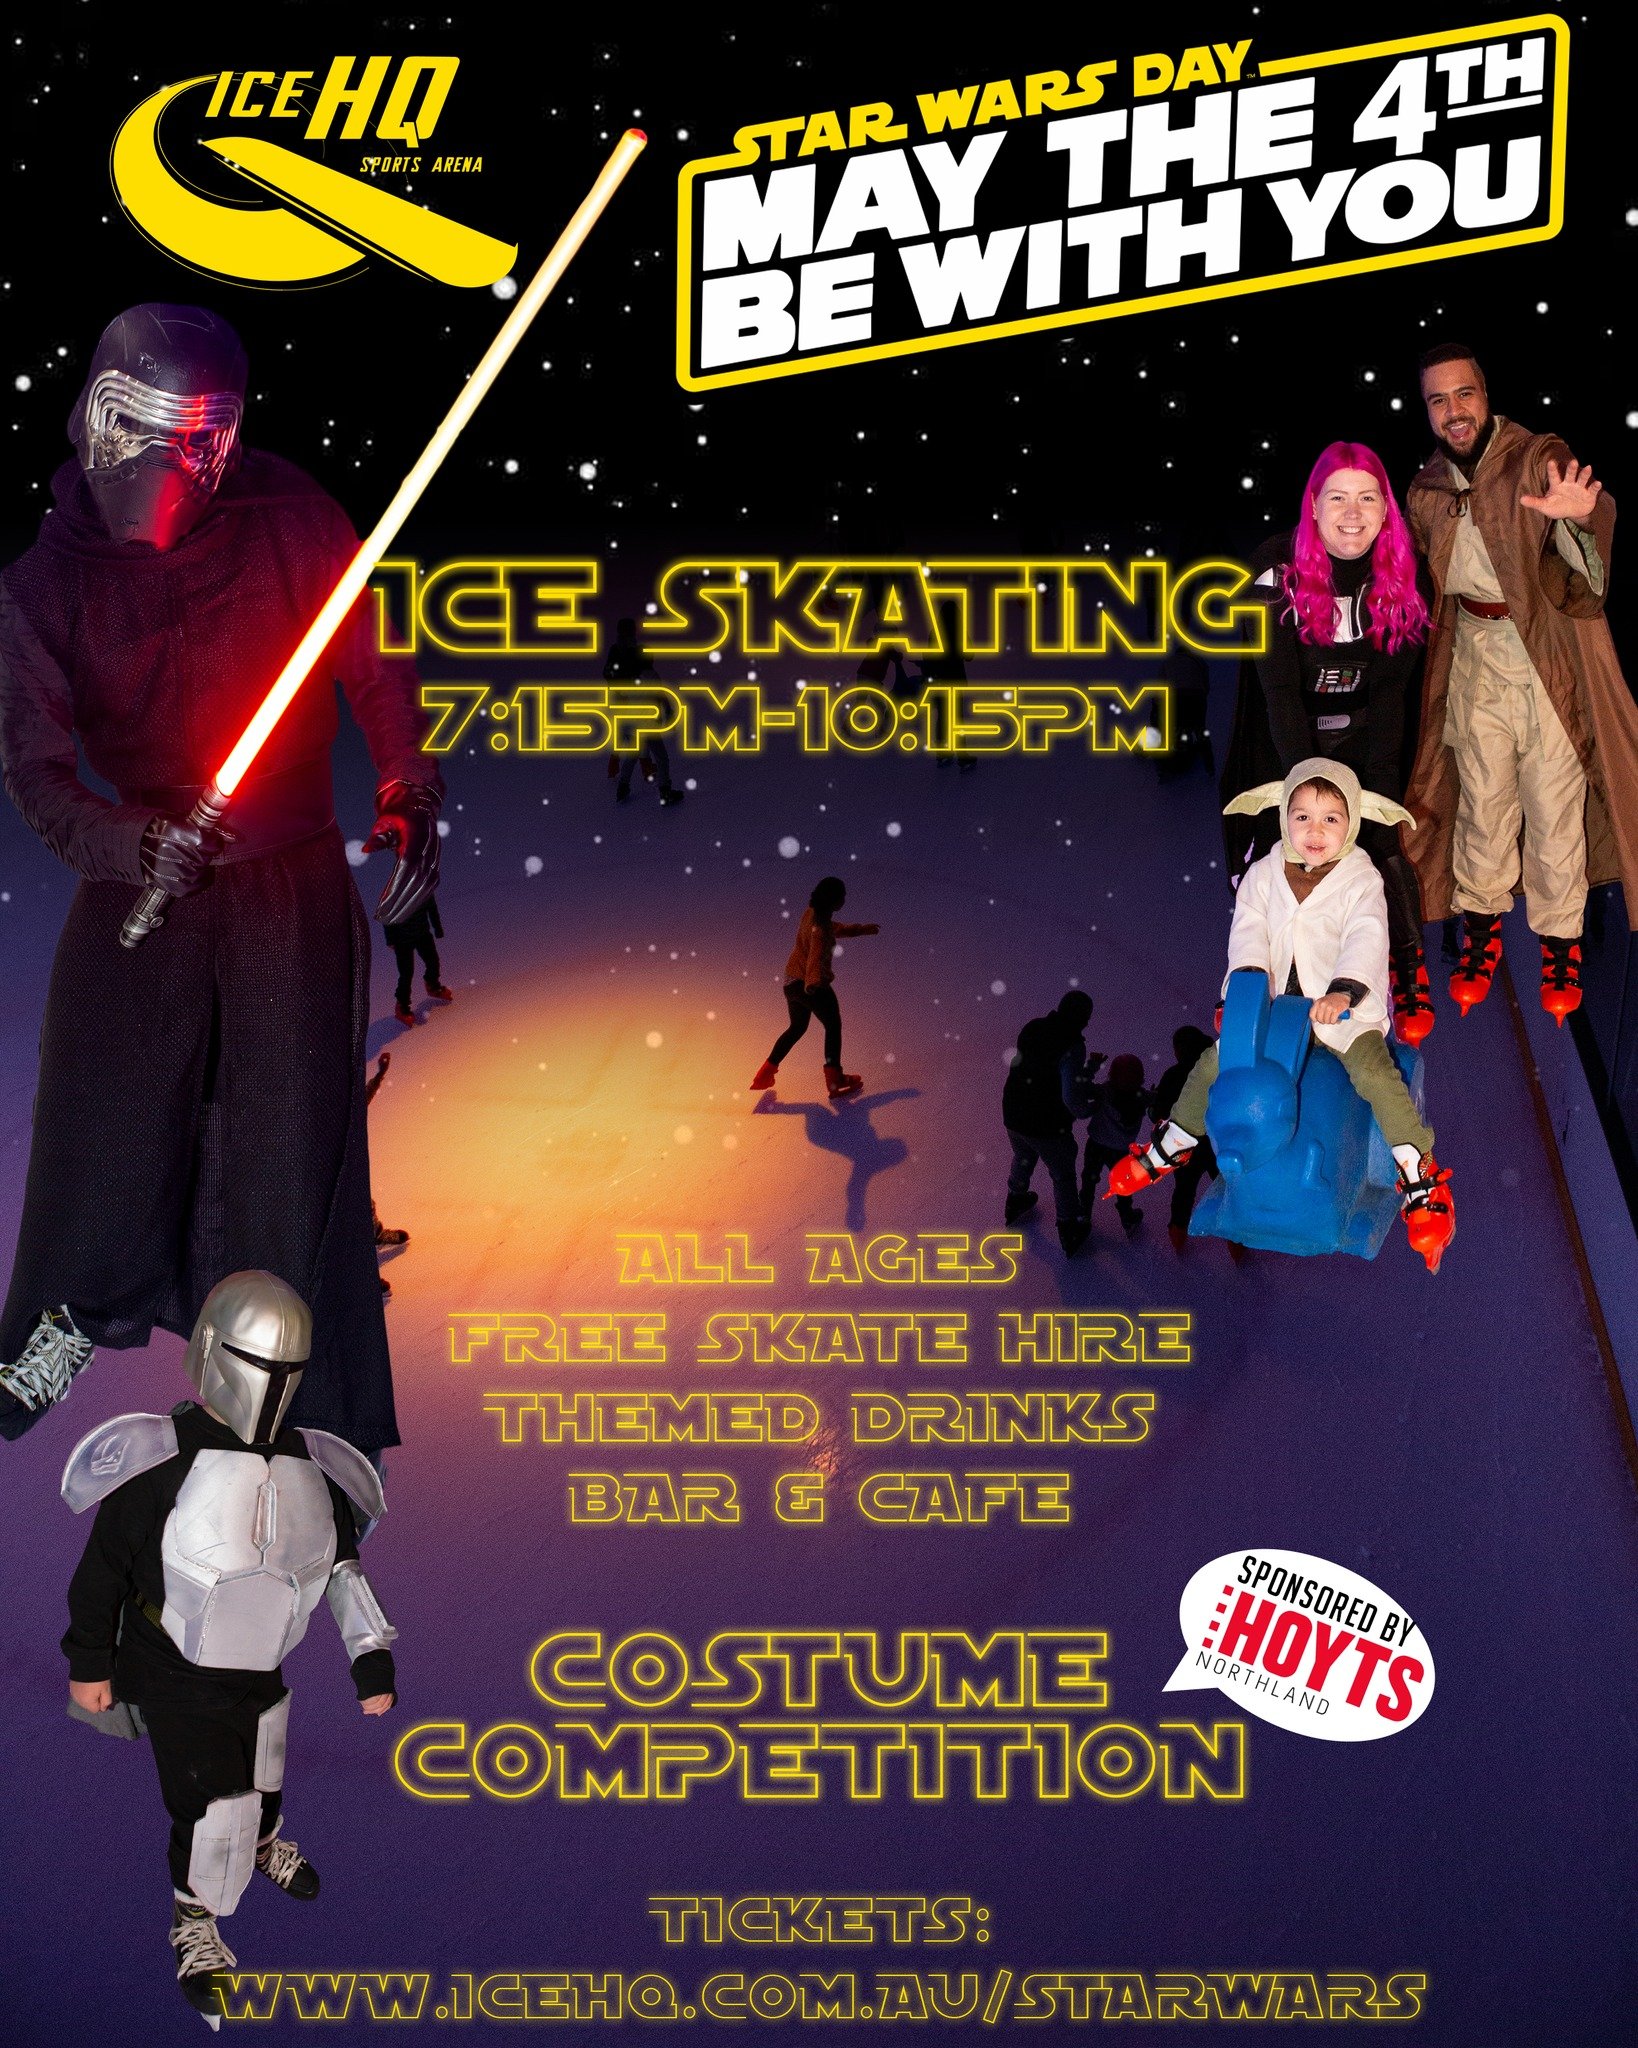 May the 4th be with you tonight as we break out the lightsabers and don the Jedi robes for iceHQ&rsquo;s Star Wars ice skating night ⛸️🌌🚀✨

🗓️ May the 4th
🕒 7:15pm - 10:15 PM
📍iceHQ - 1 Blake Street Reservoir VIC 3073
Book your tickets online to